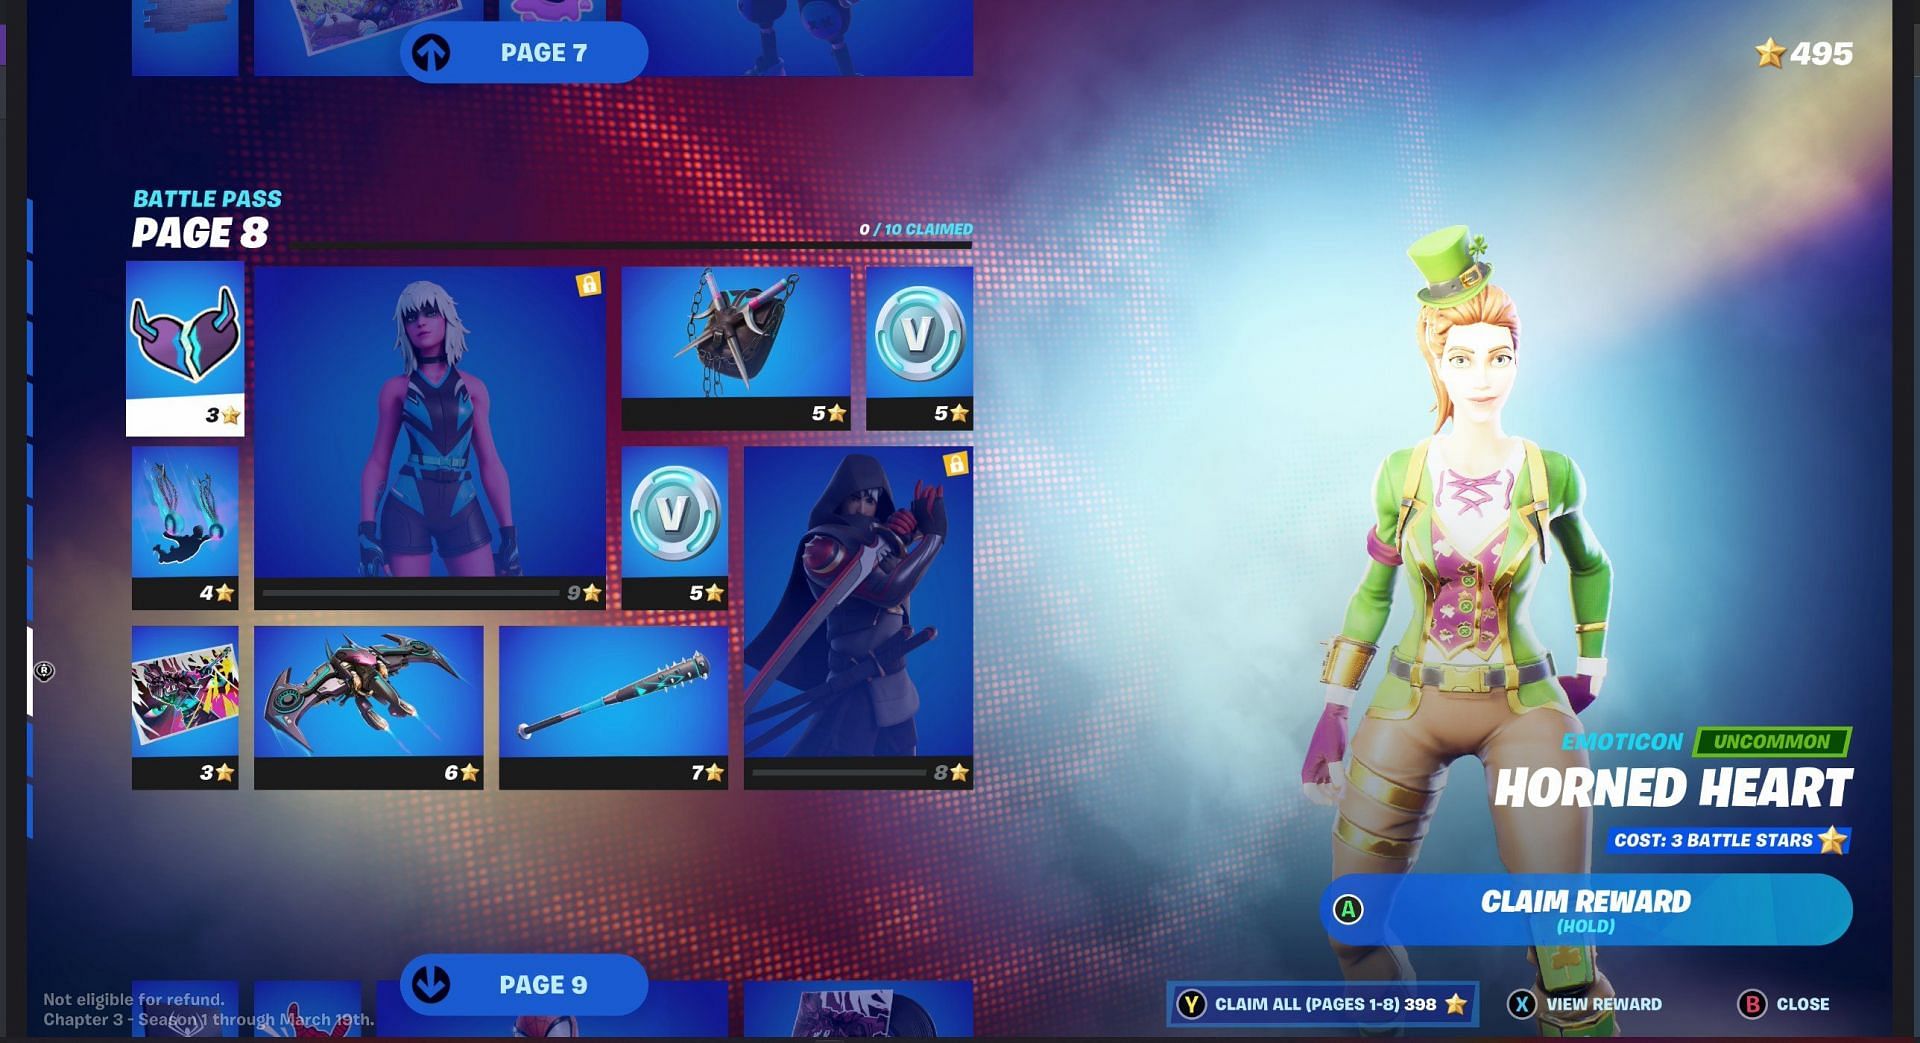 Page 8 of the Battle Pass (Image via Fortnite)